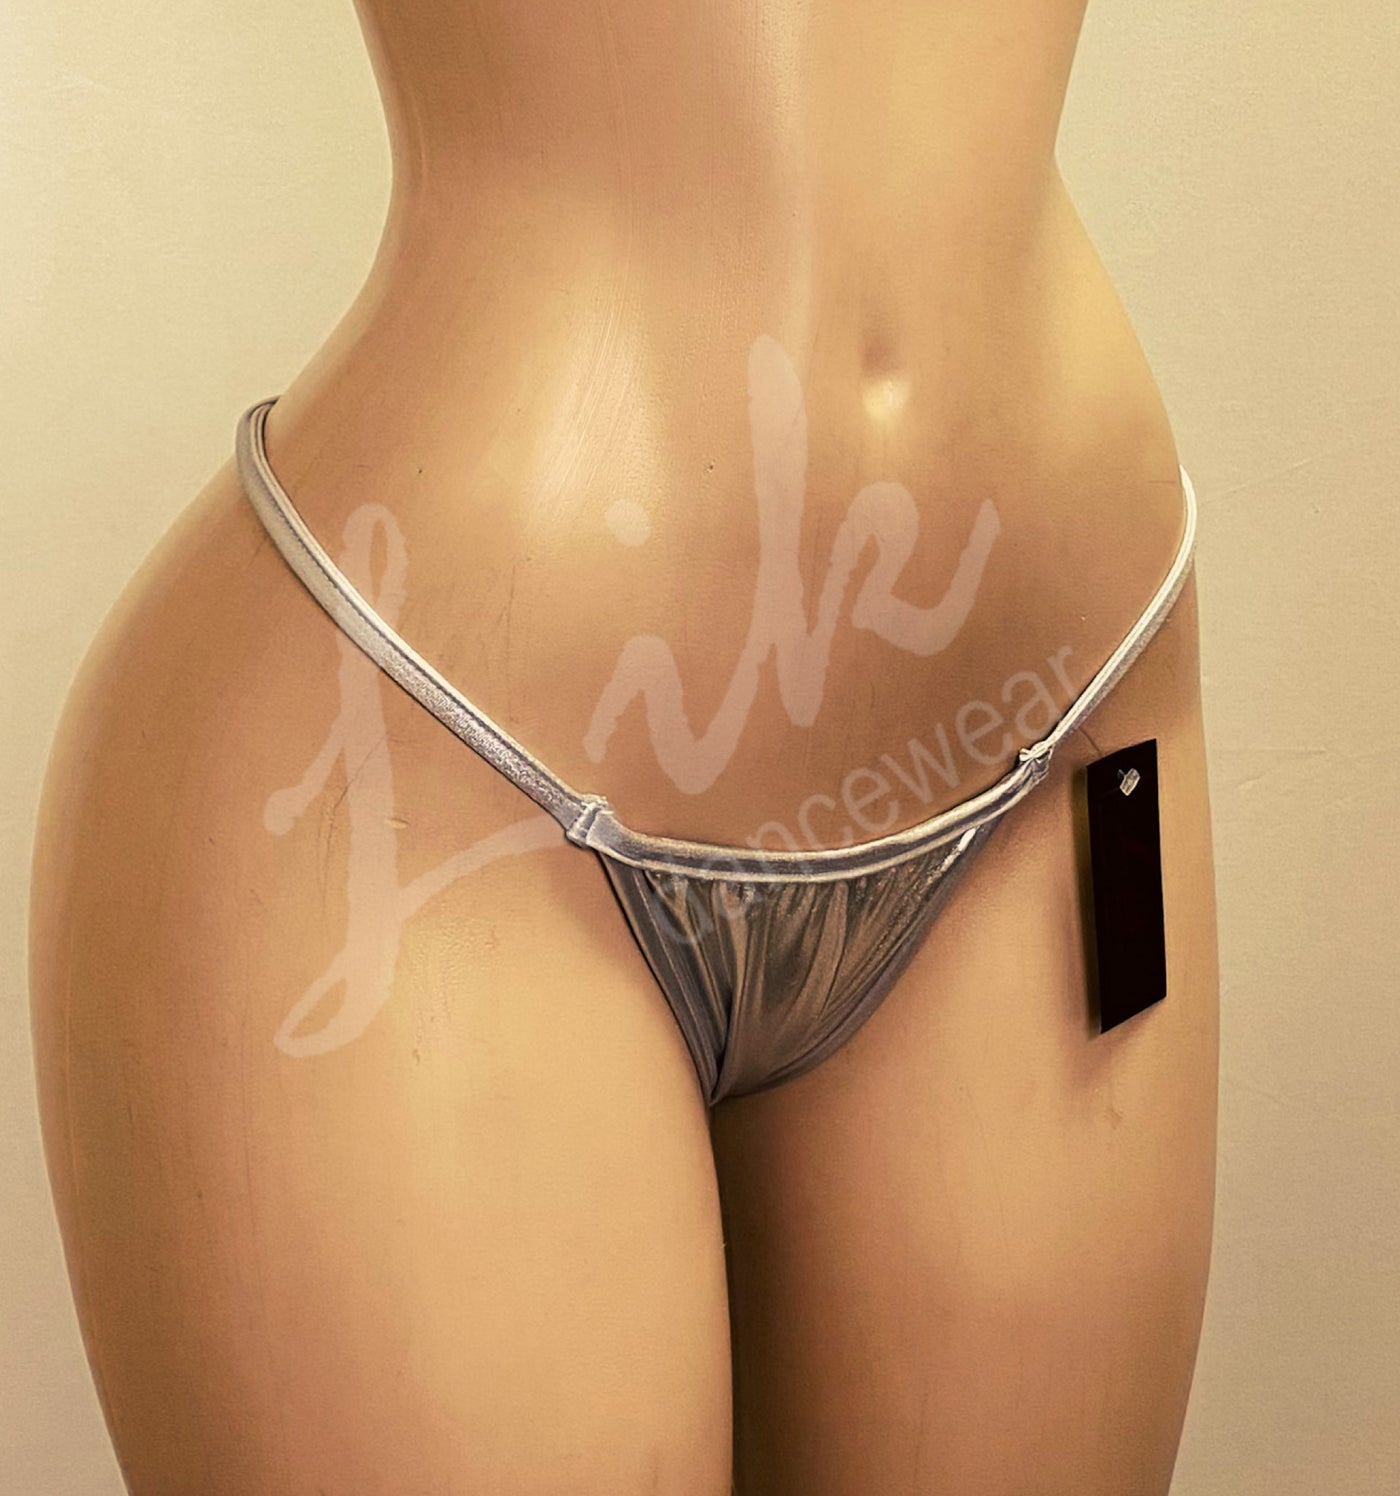 Thin band Thong for exotic dancers